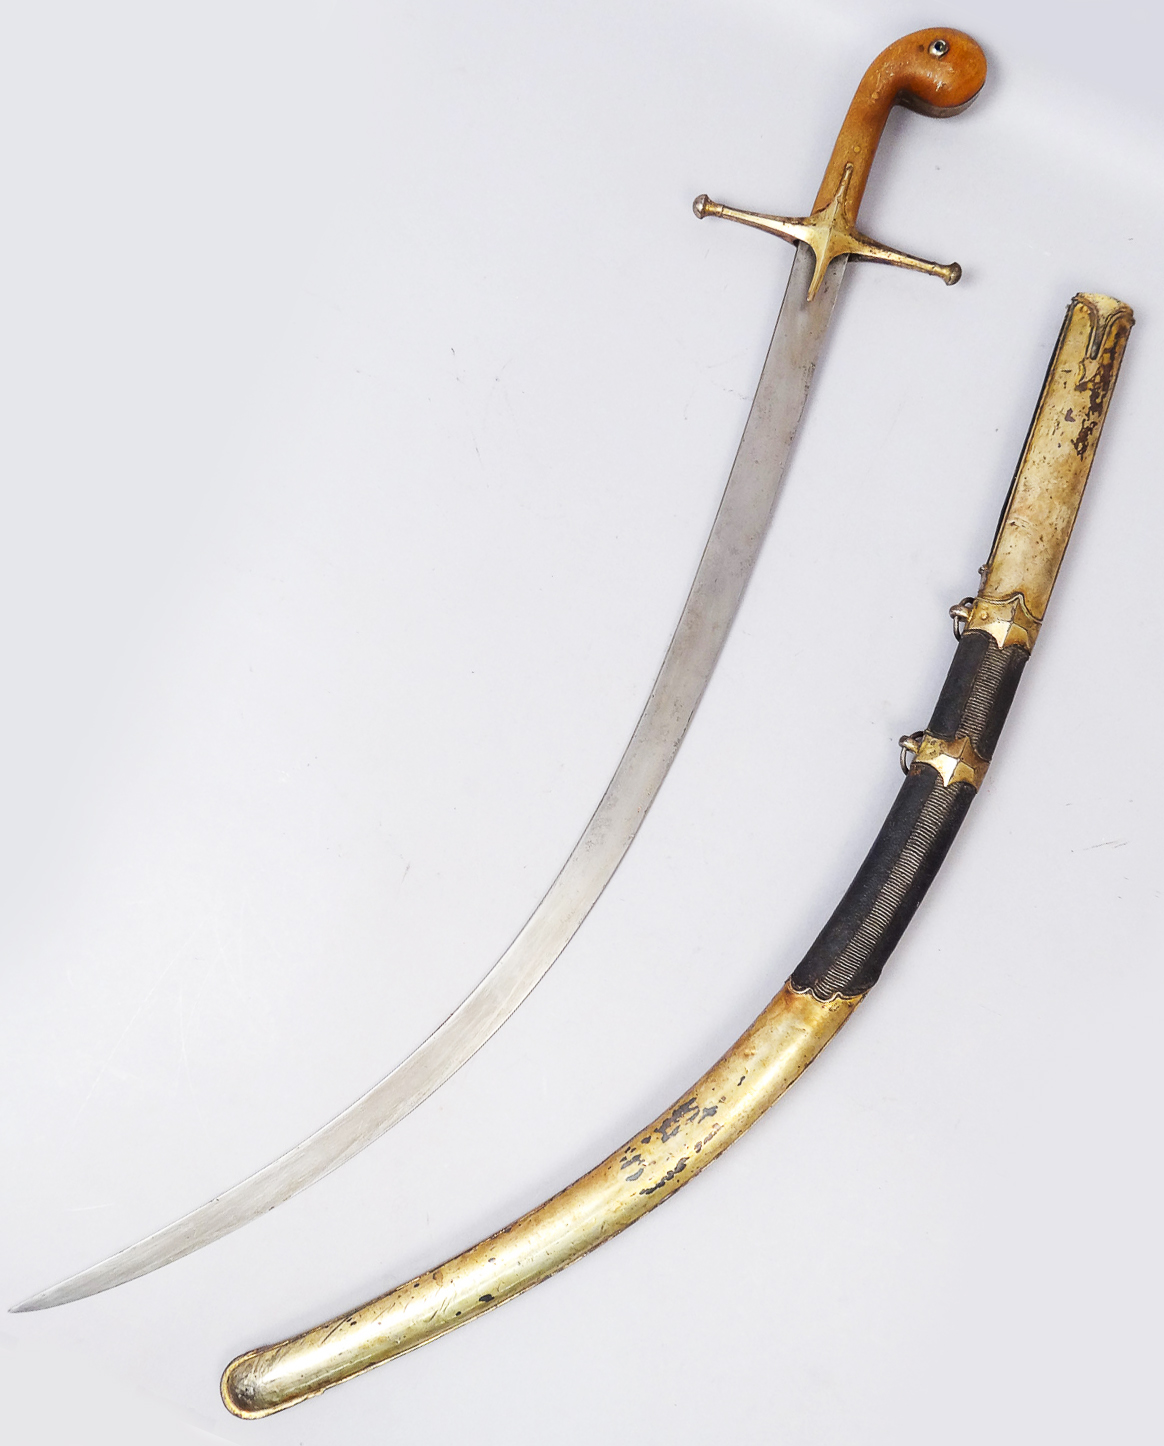 Arabic Steel and Wooden Handled Saber with Scabbard